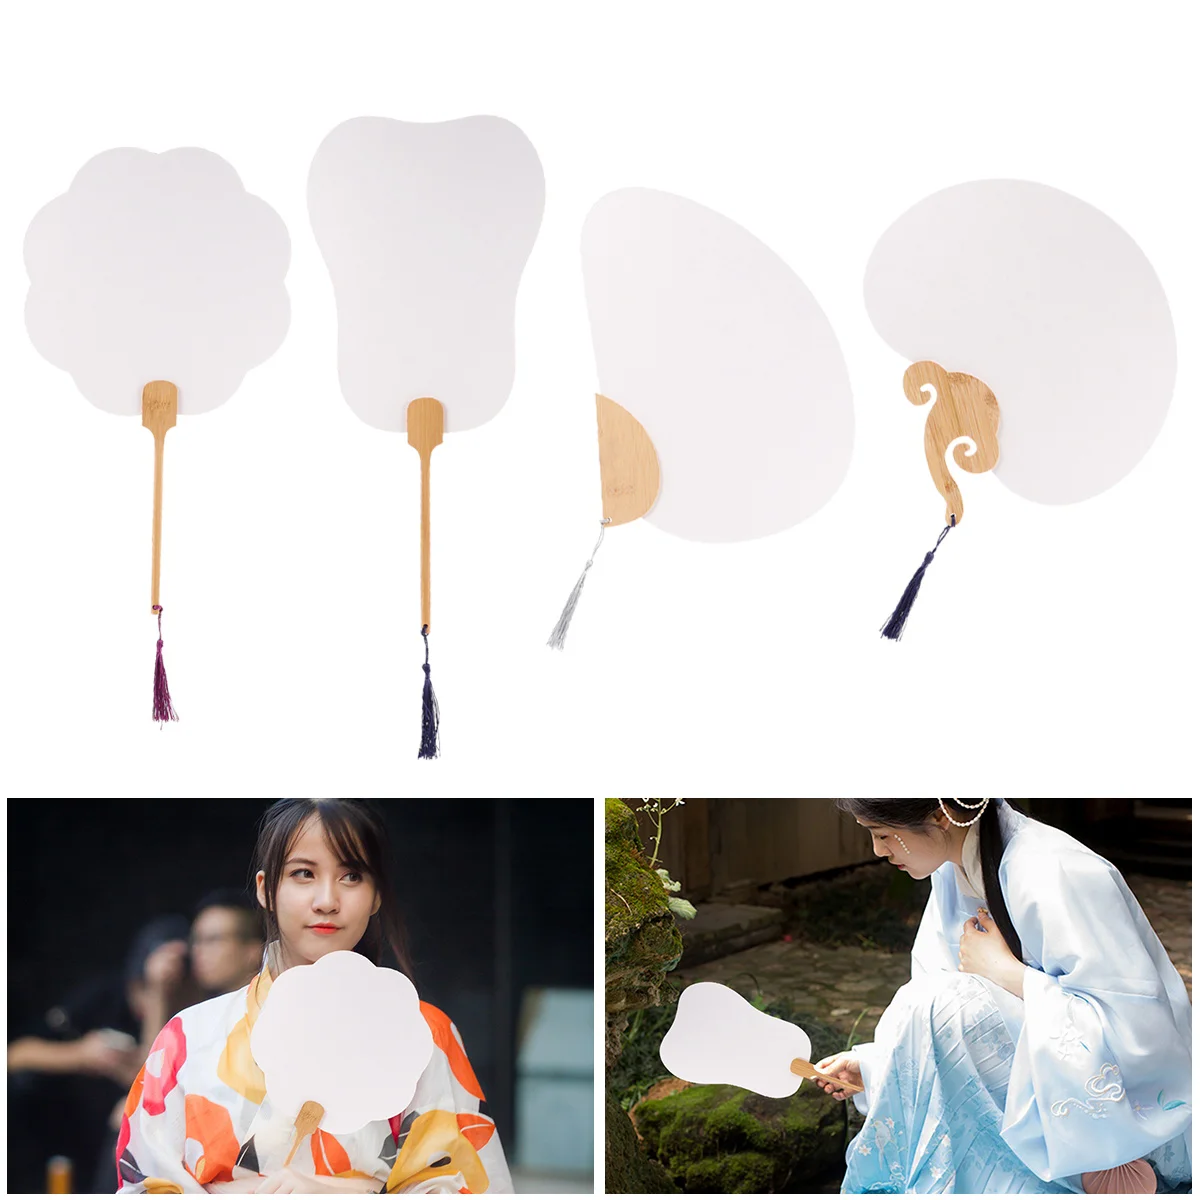 

Fans Paper Fan Hand White Church Prop Photo Bulk Wedding Paddle Blank Accordion Promotional Foldable Chinese Mandarin Diy Party